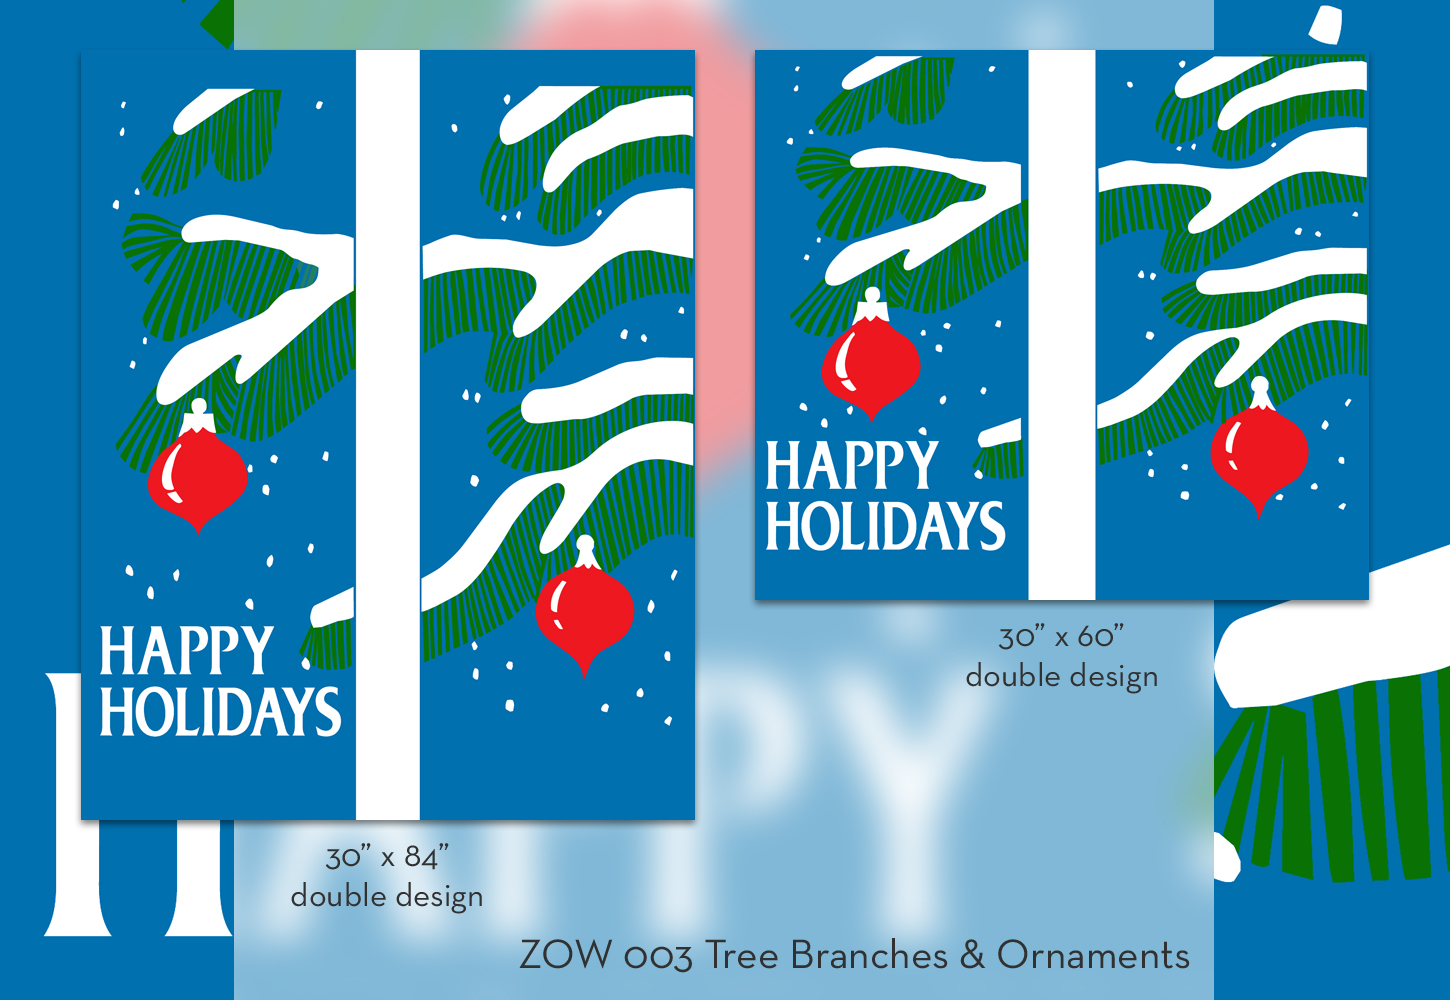 ZOW 003 Tree Branches & Ornaments